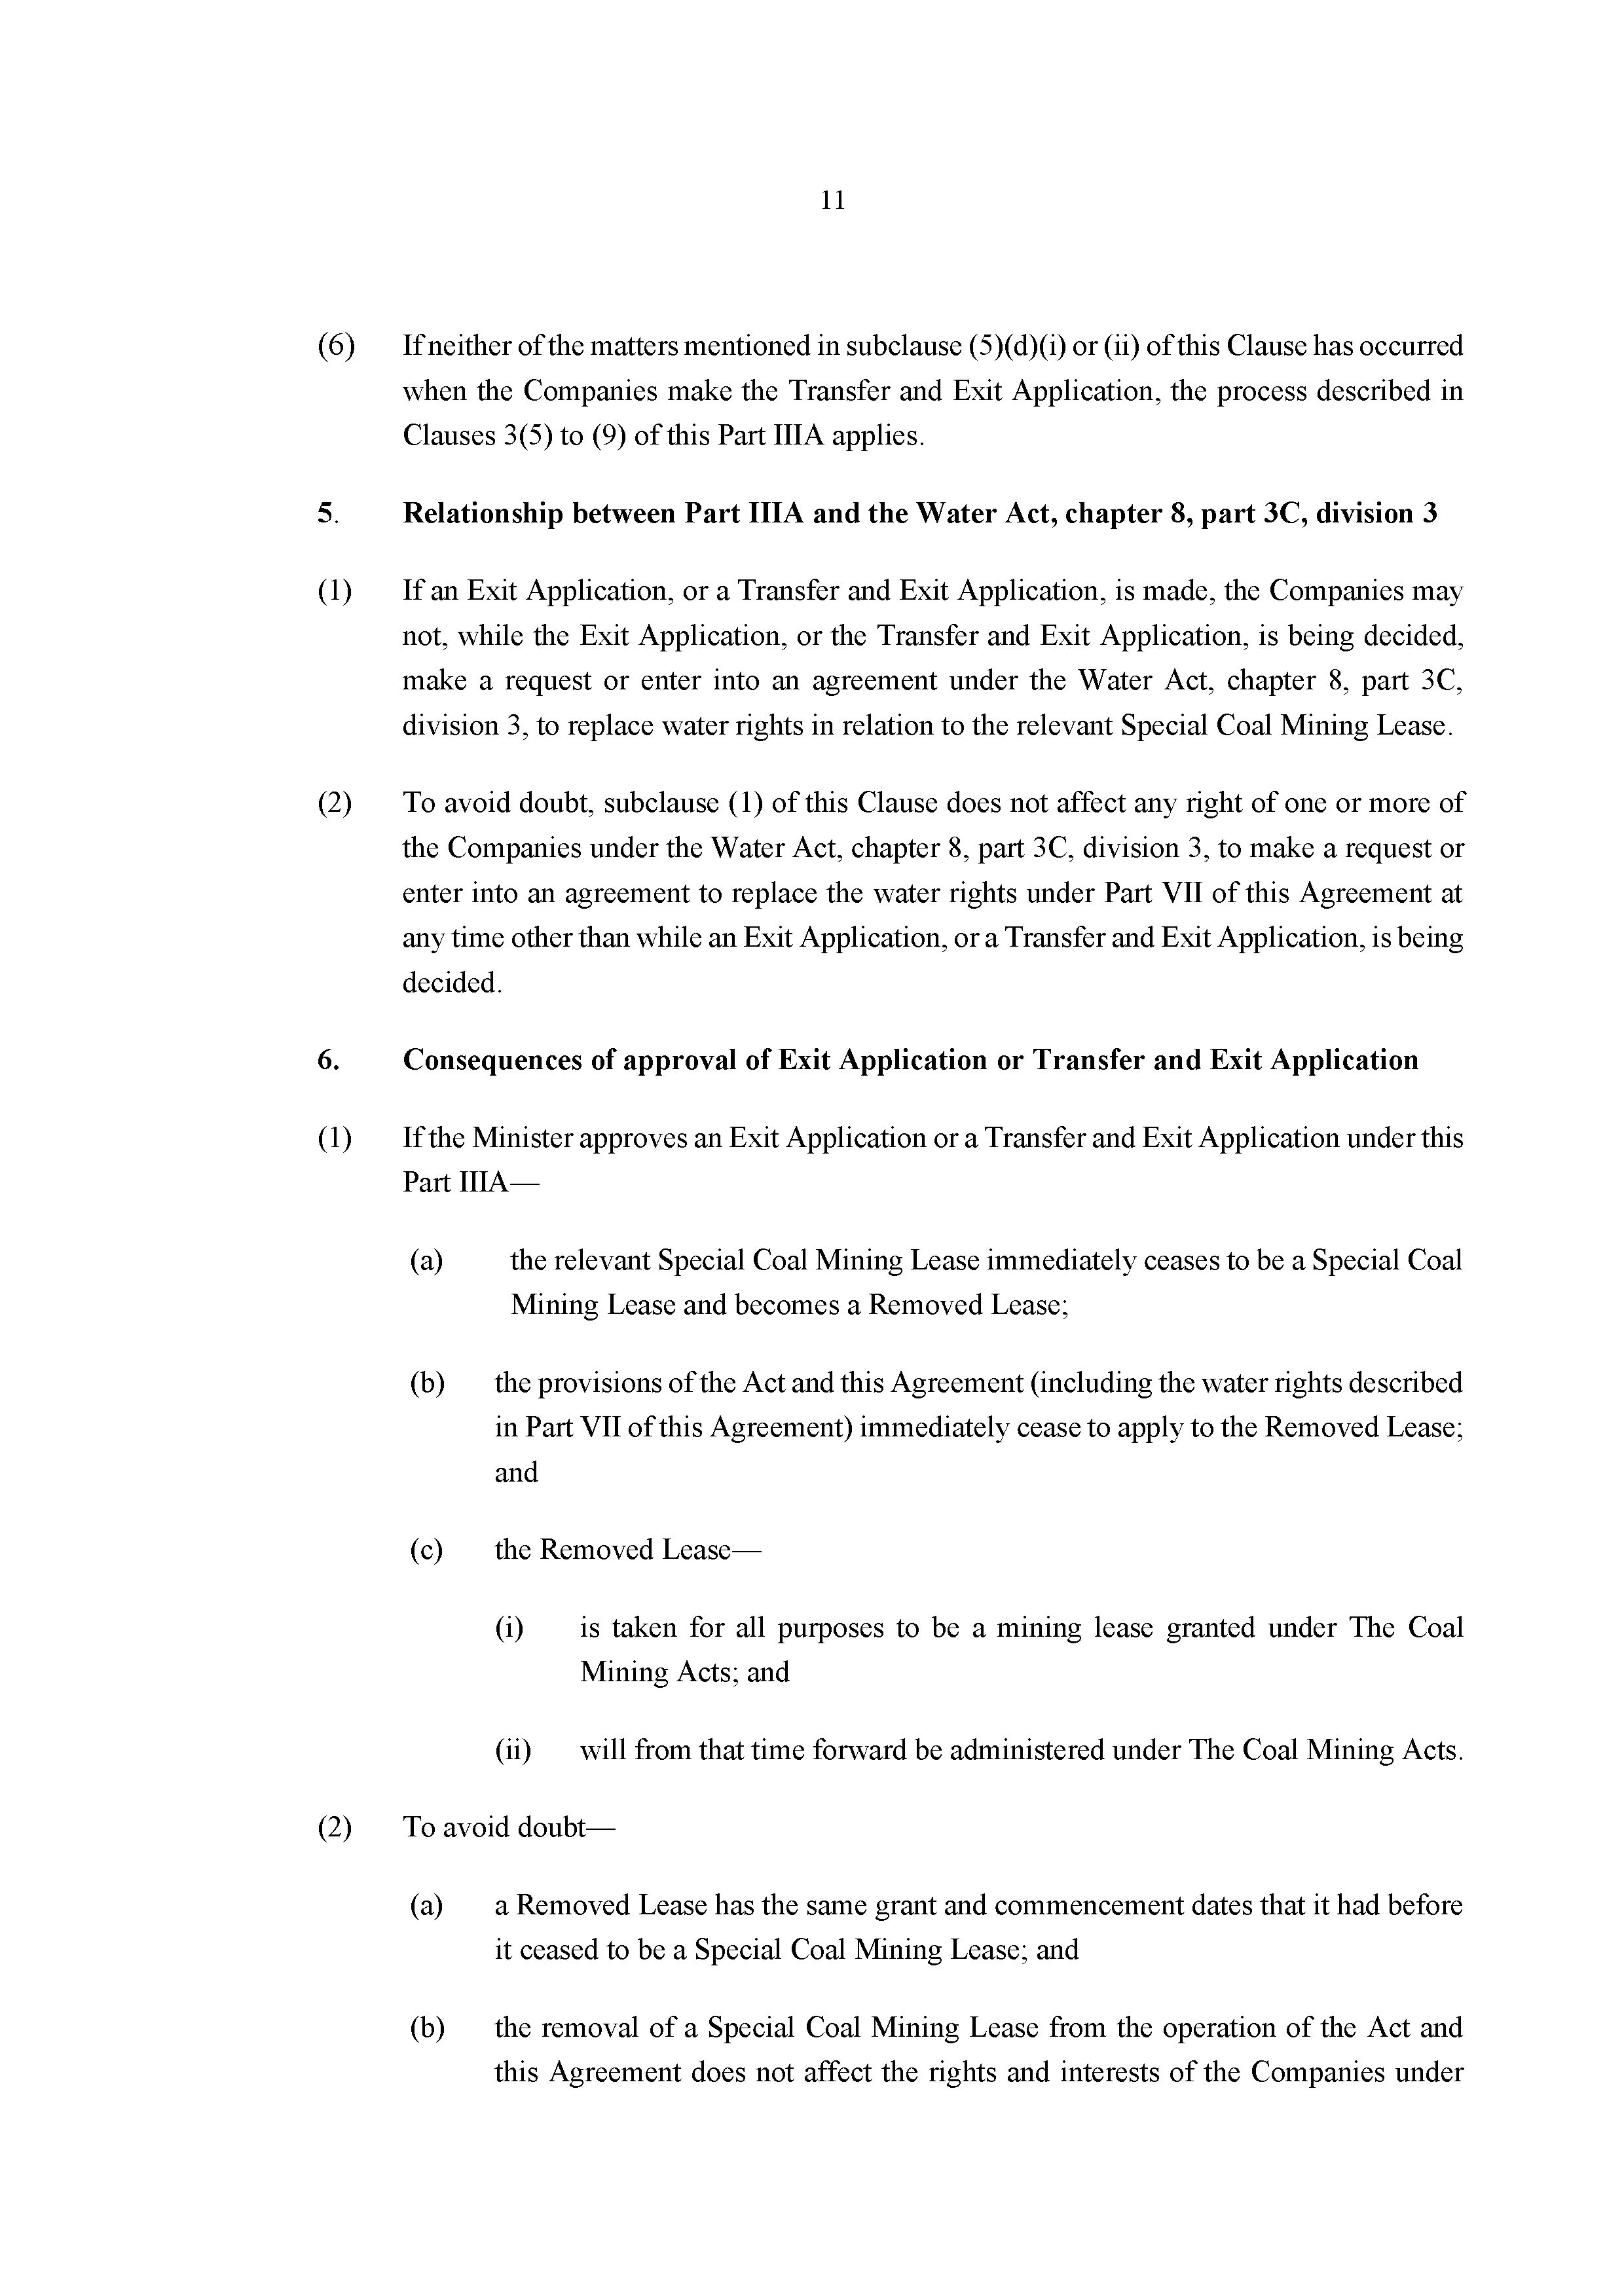 Proposed 2022 agreement page 11